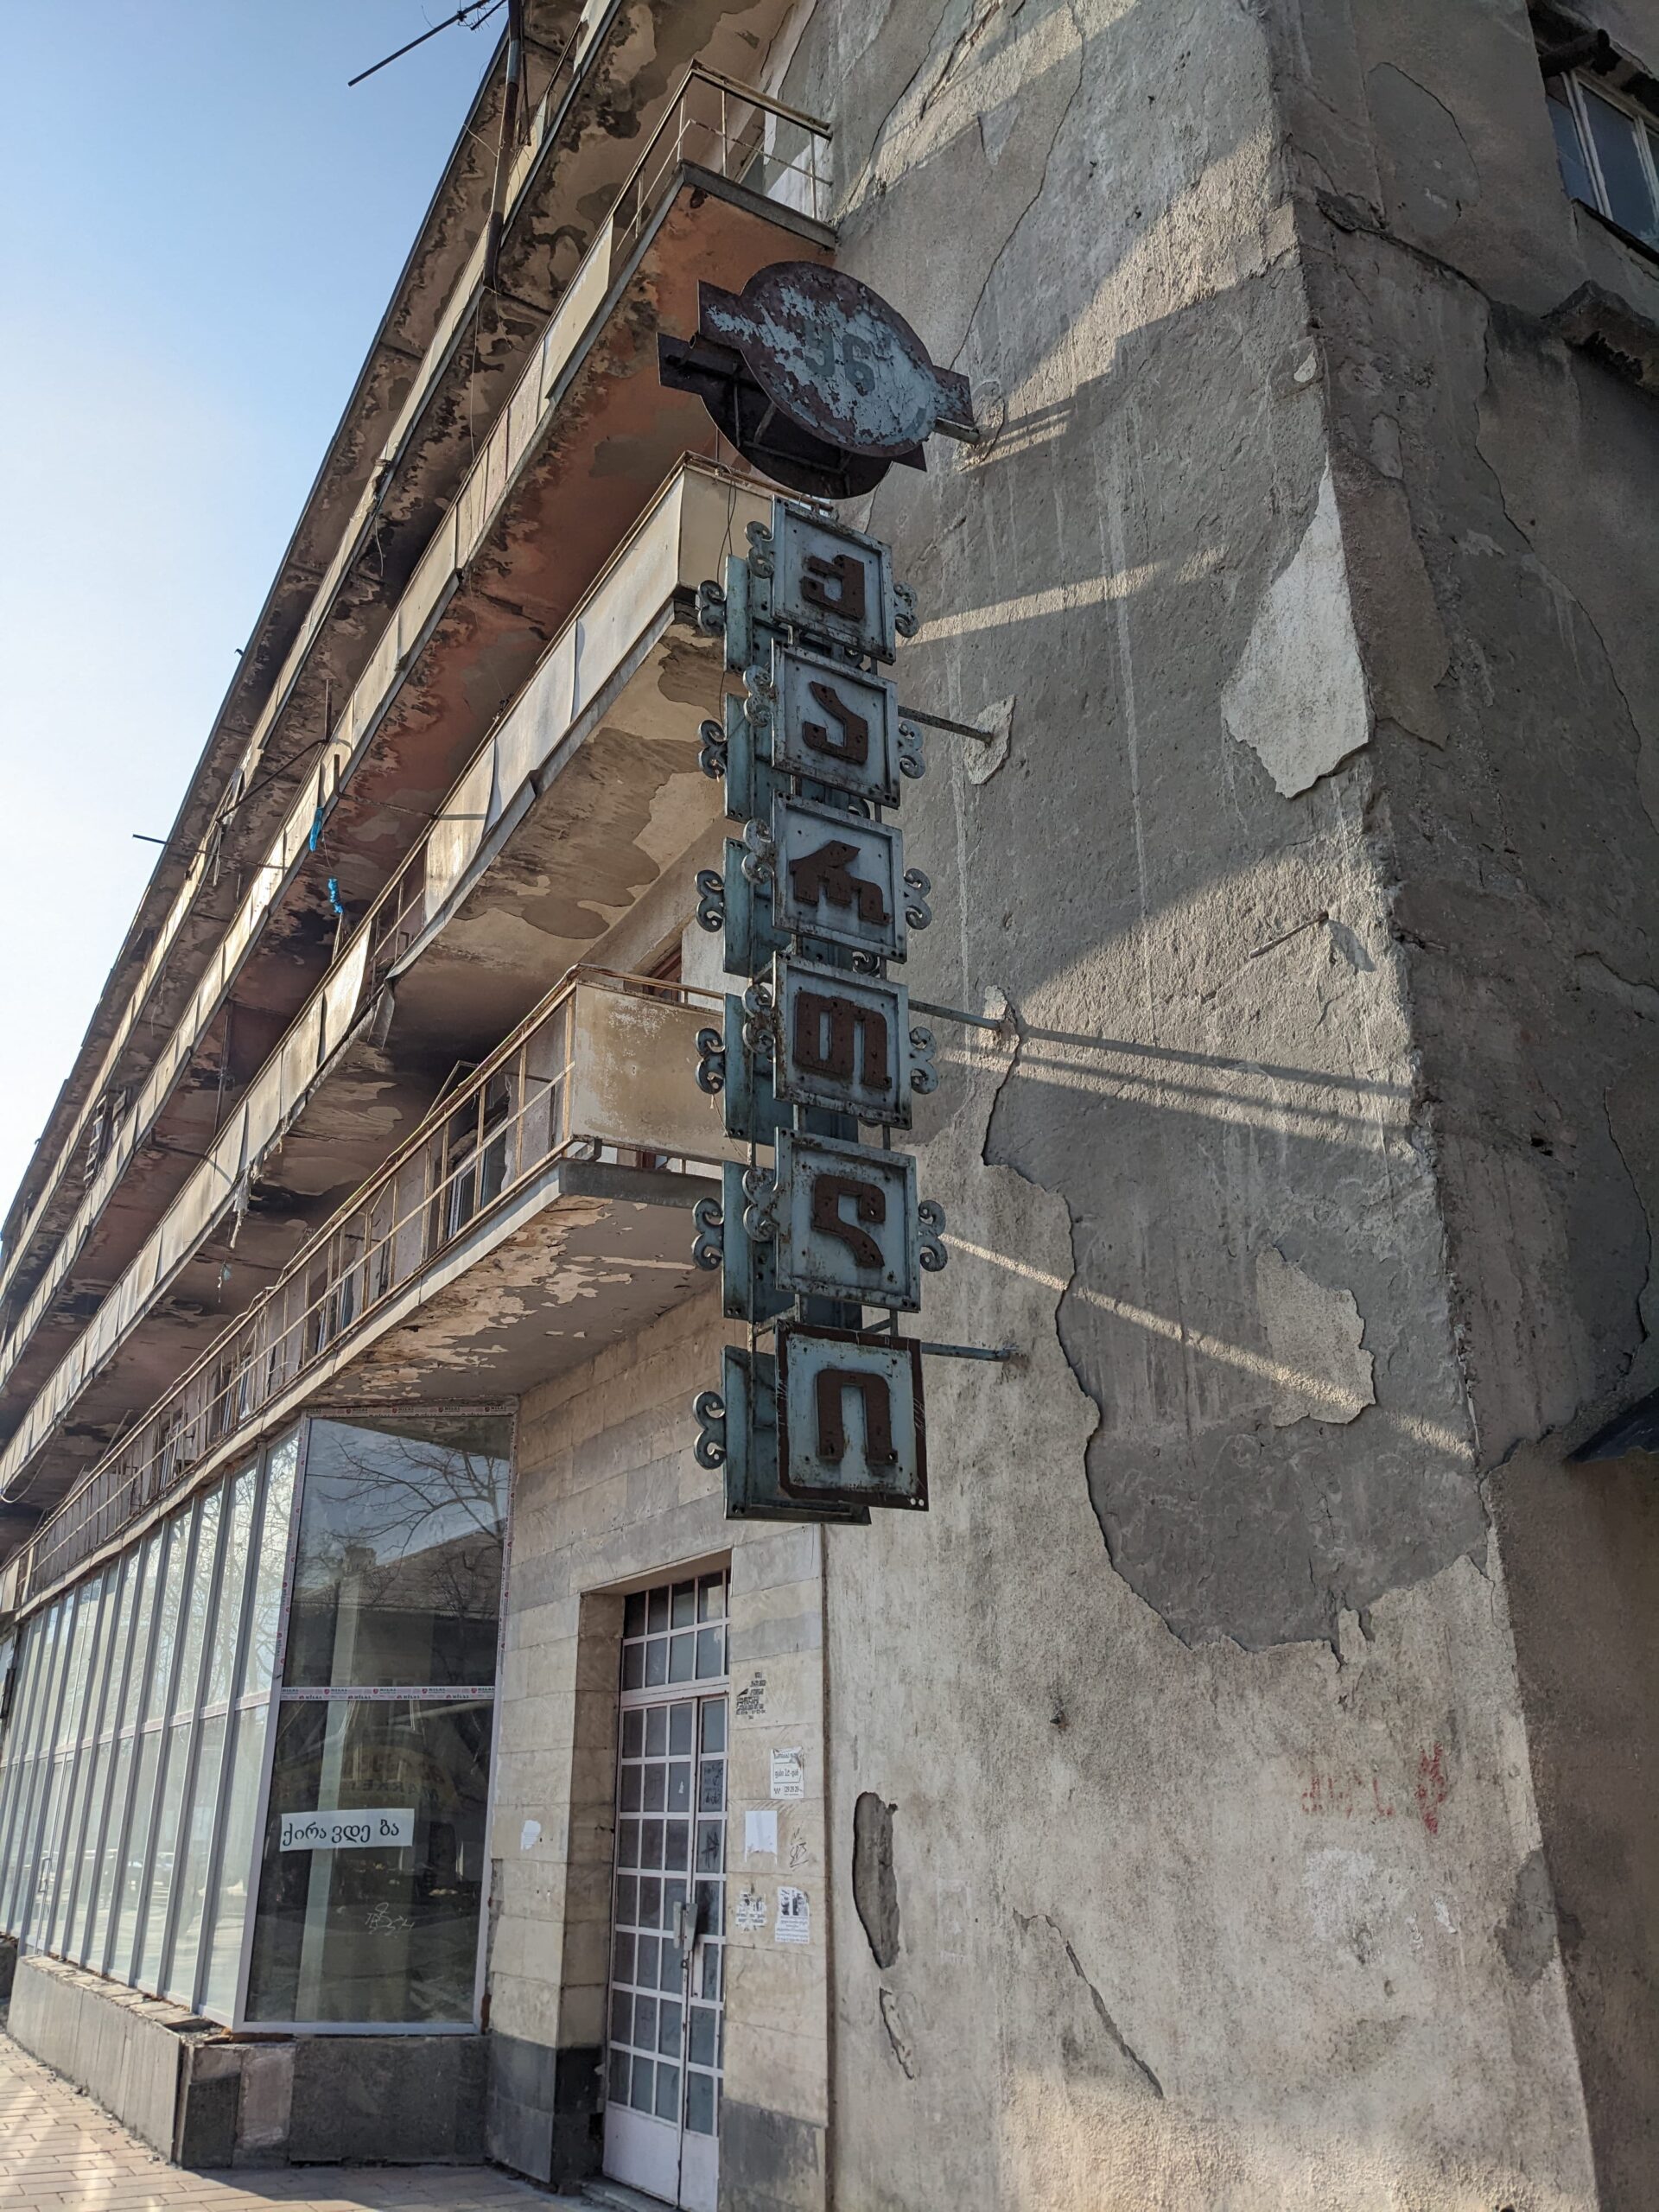 retro sign, things to do in gori